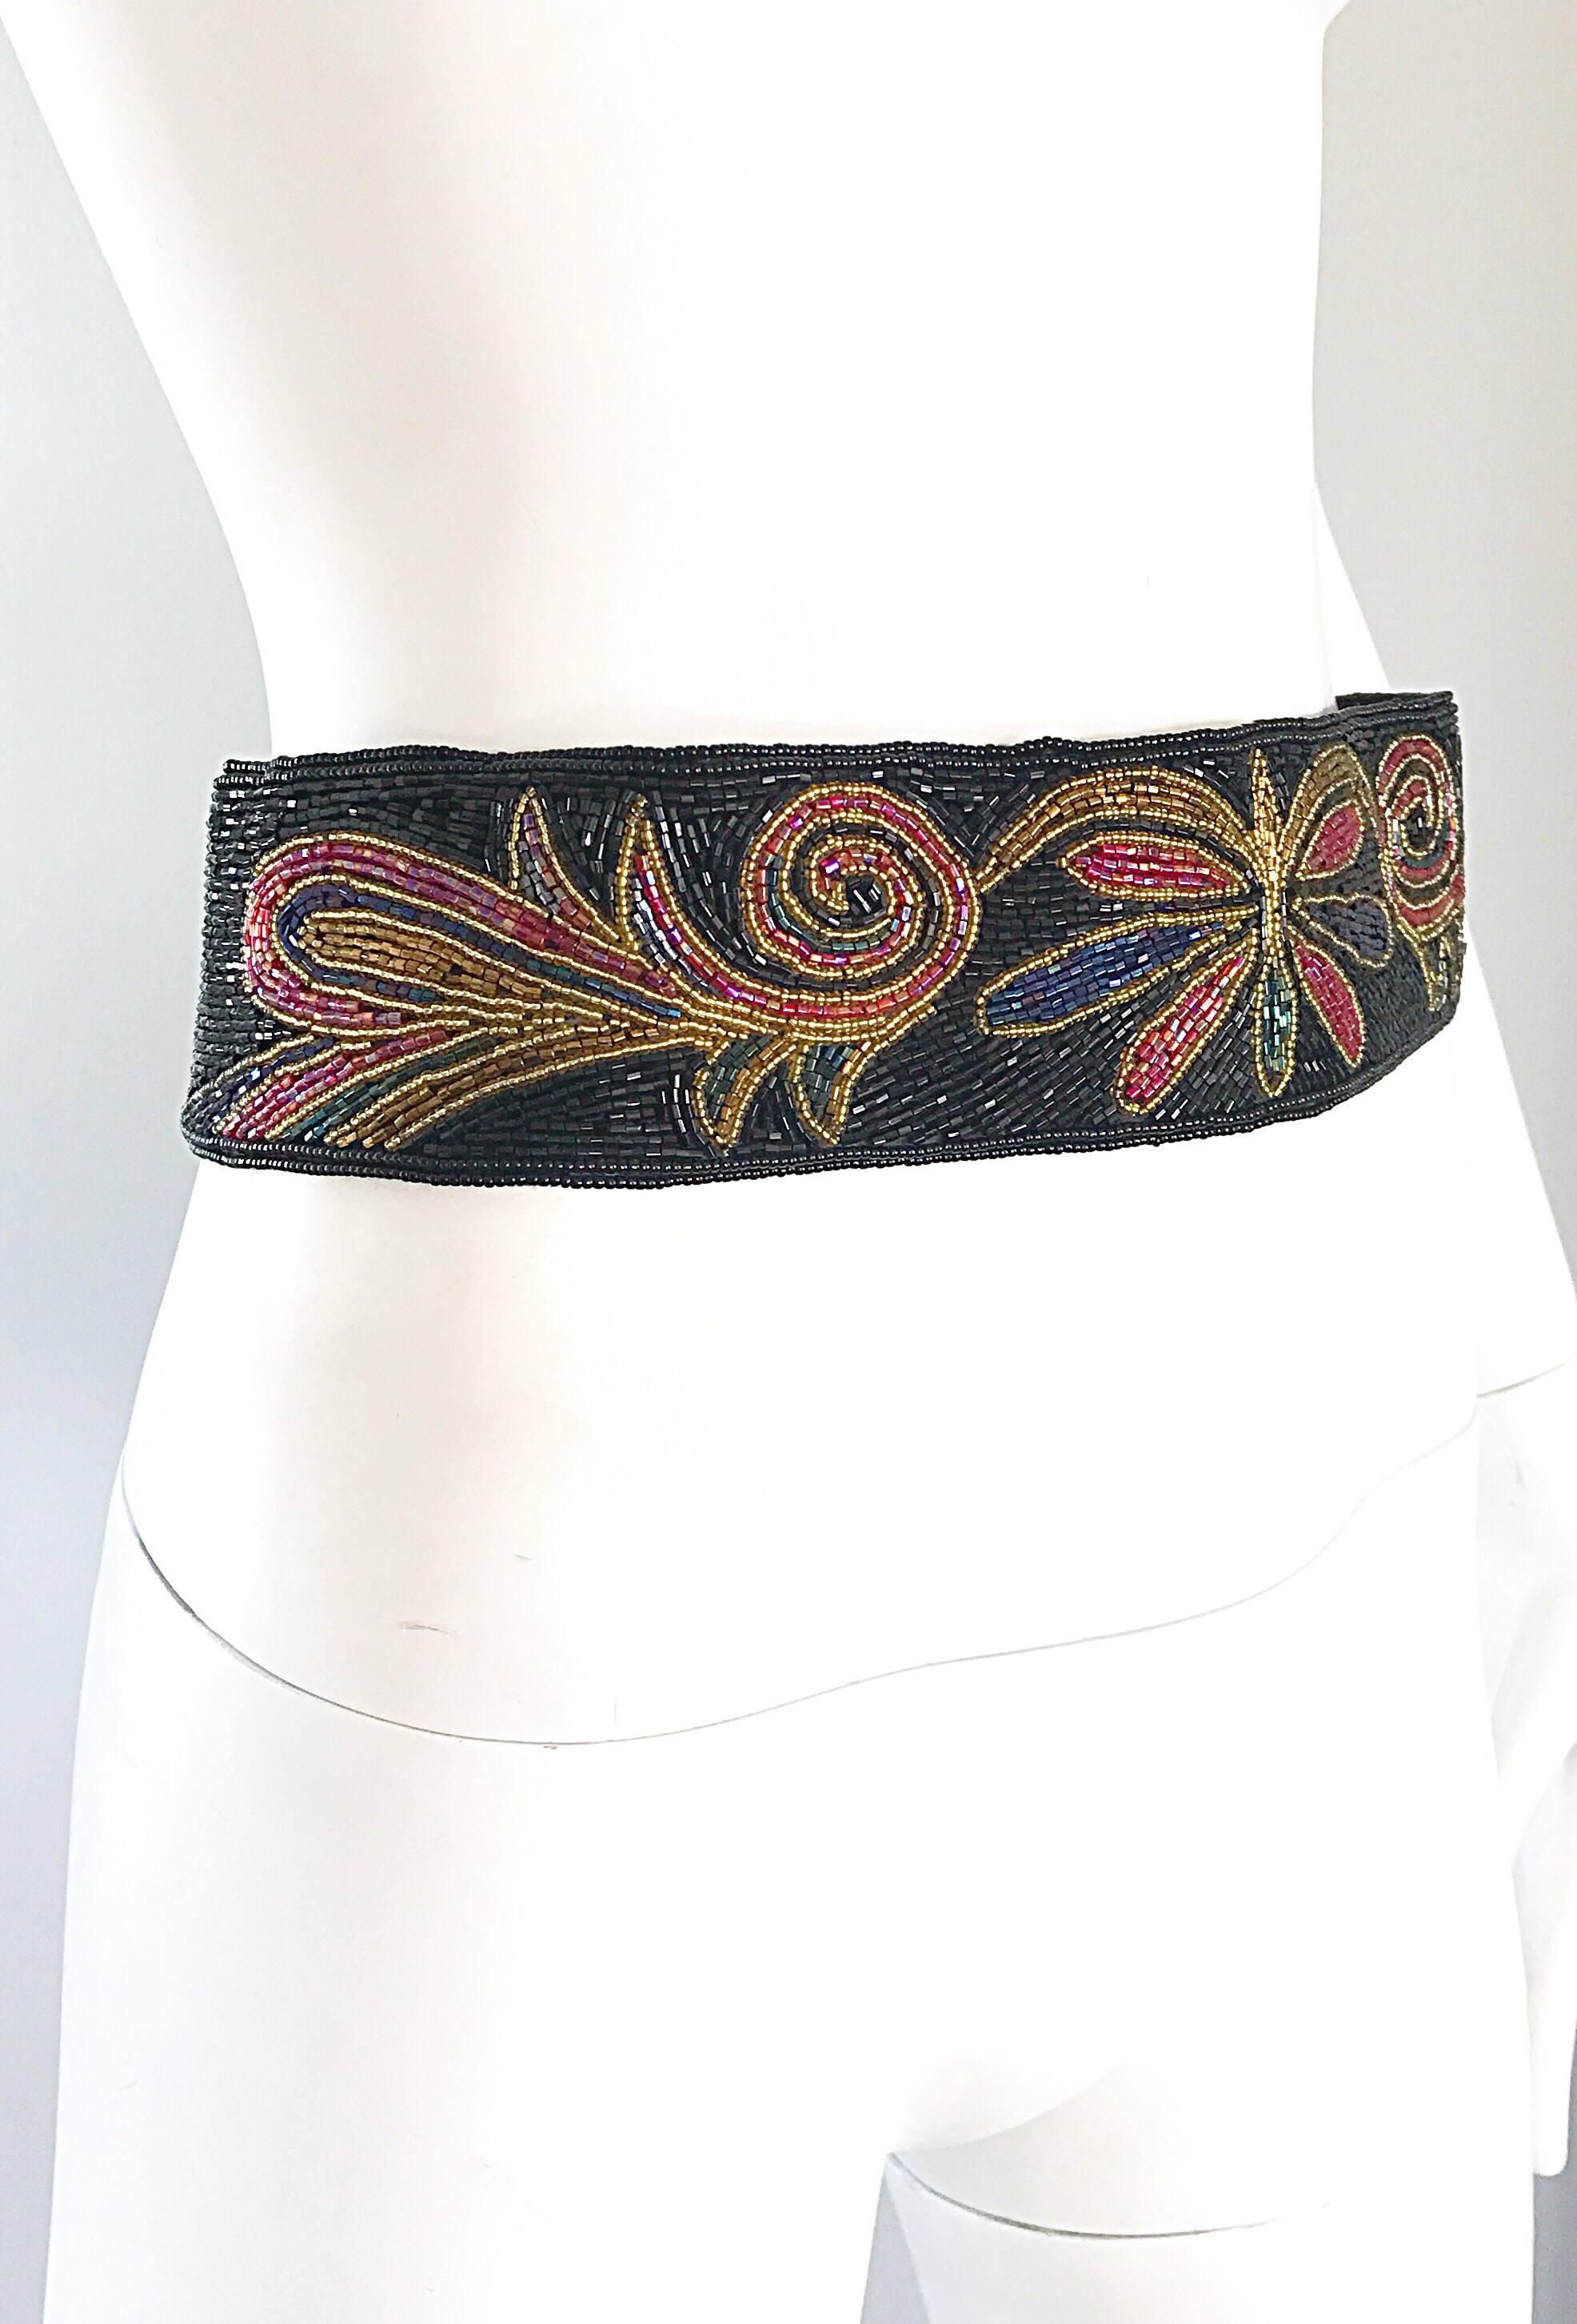 Women's Fabulous 1980s Fully Beaded Butterfly Colorful Black Vintage 80s Belt For Sale